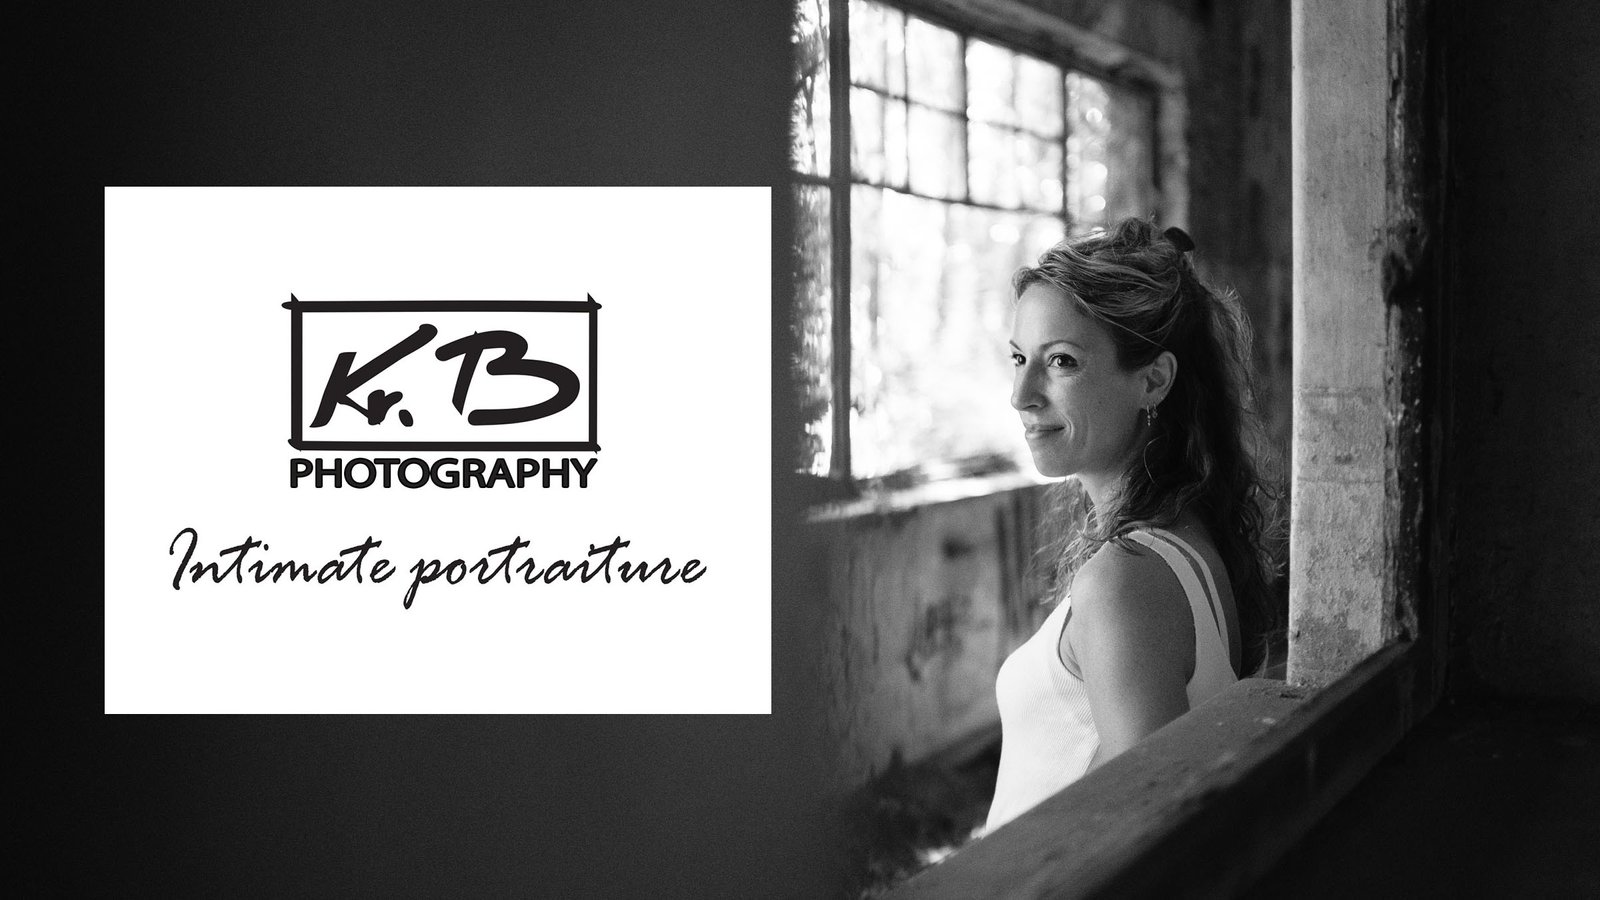 KrB Photography, cover photo 12